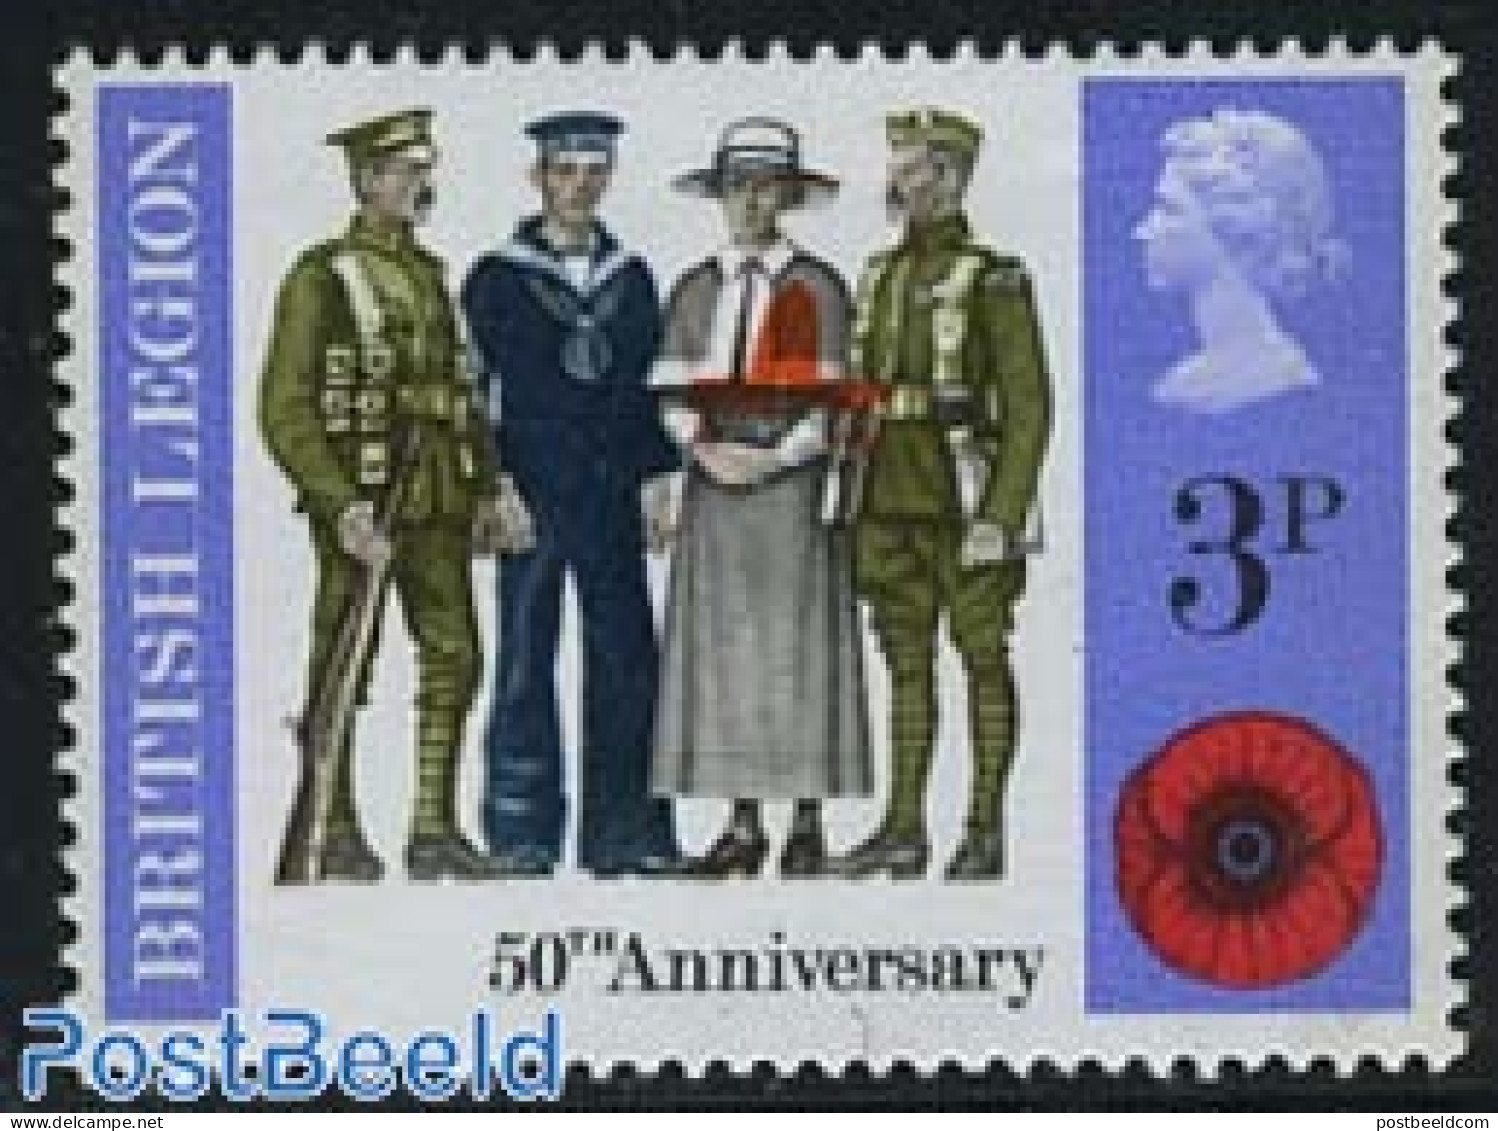 Great Britain 1971 3P With Strongly Moved Redorange Colour, Mint NH, Various - Errors, Misprints, Plate Flaws - Uniforms - Unused Stamps